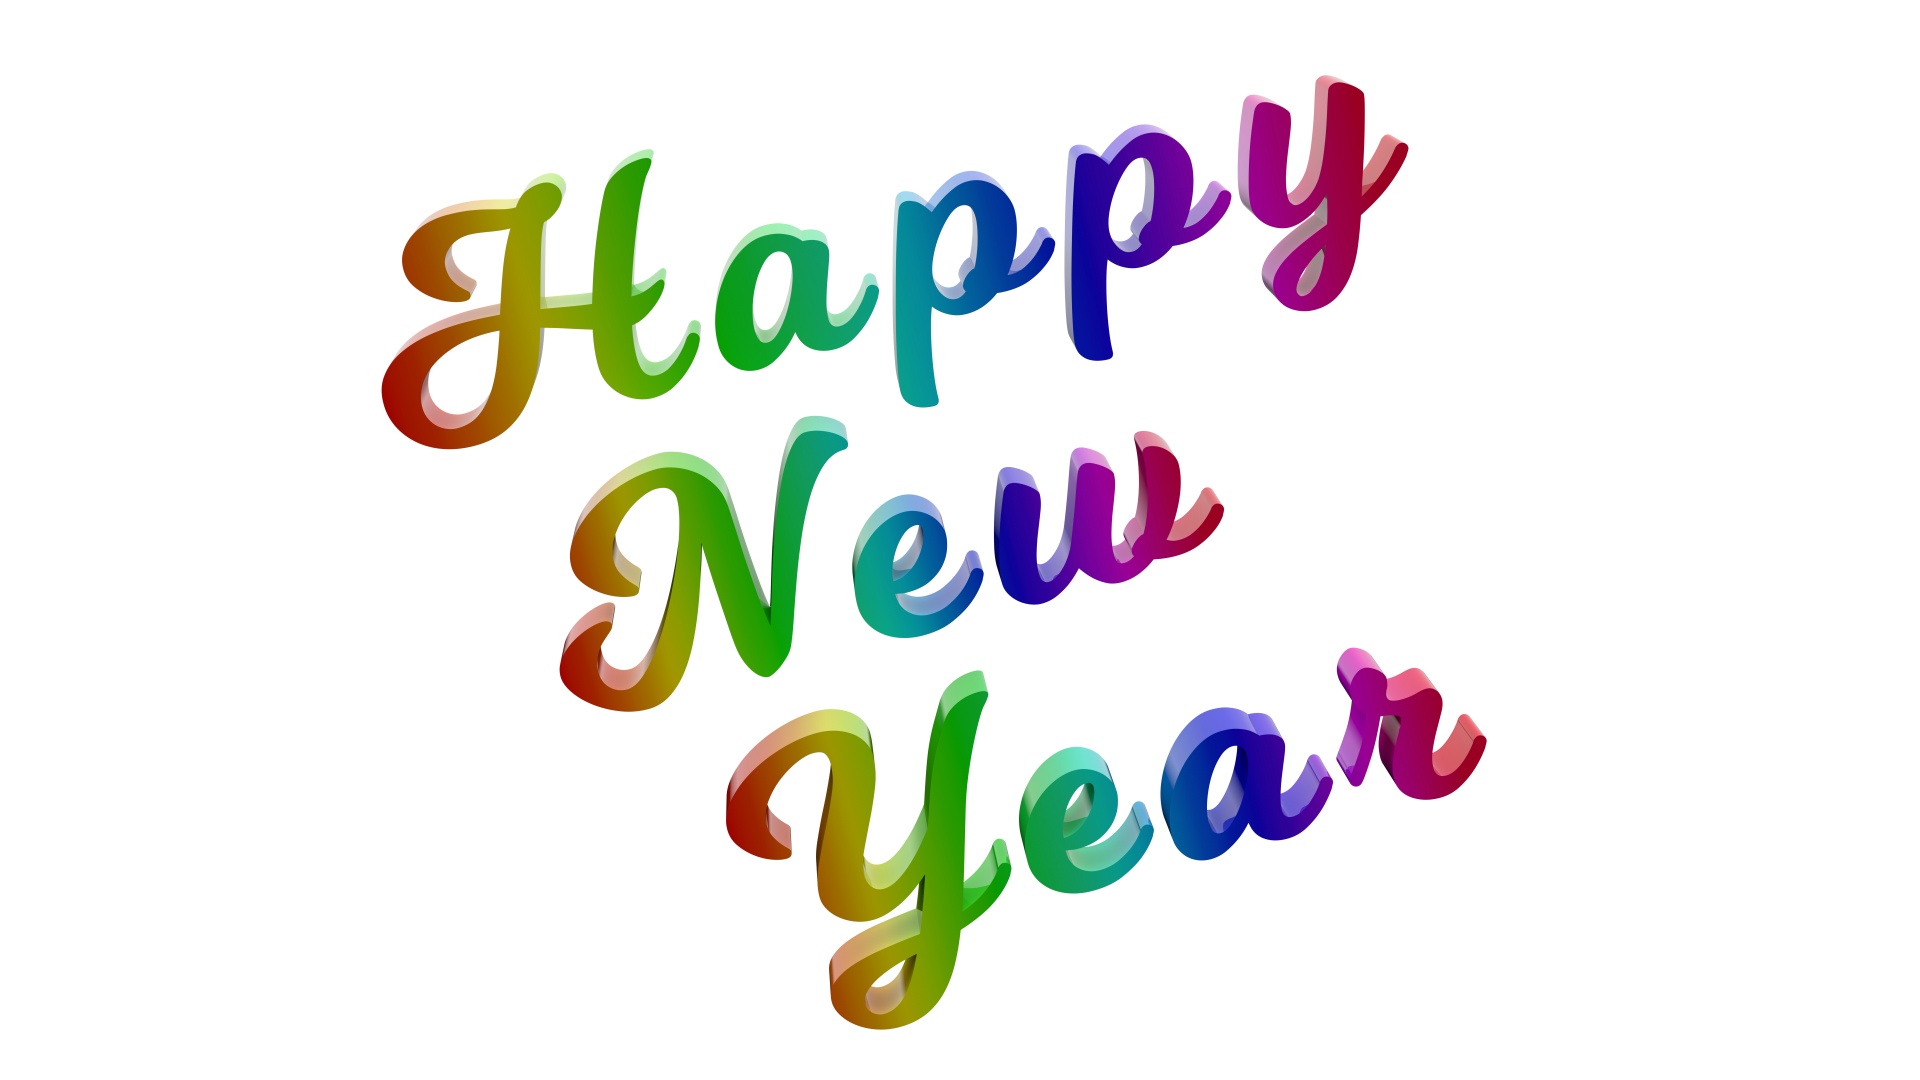 Happy New Year Colorful Glossy Metallic Title With RGB Gradient 3D Render In 8K Resolution